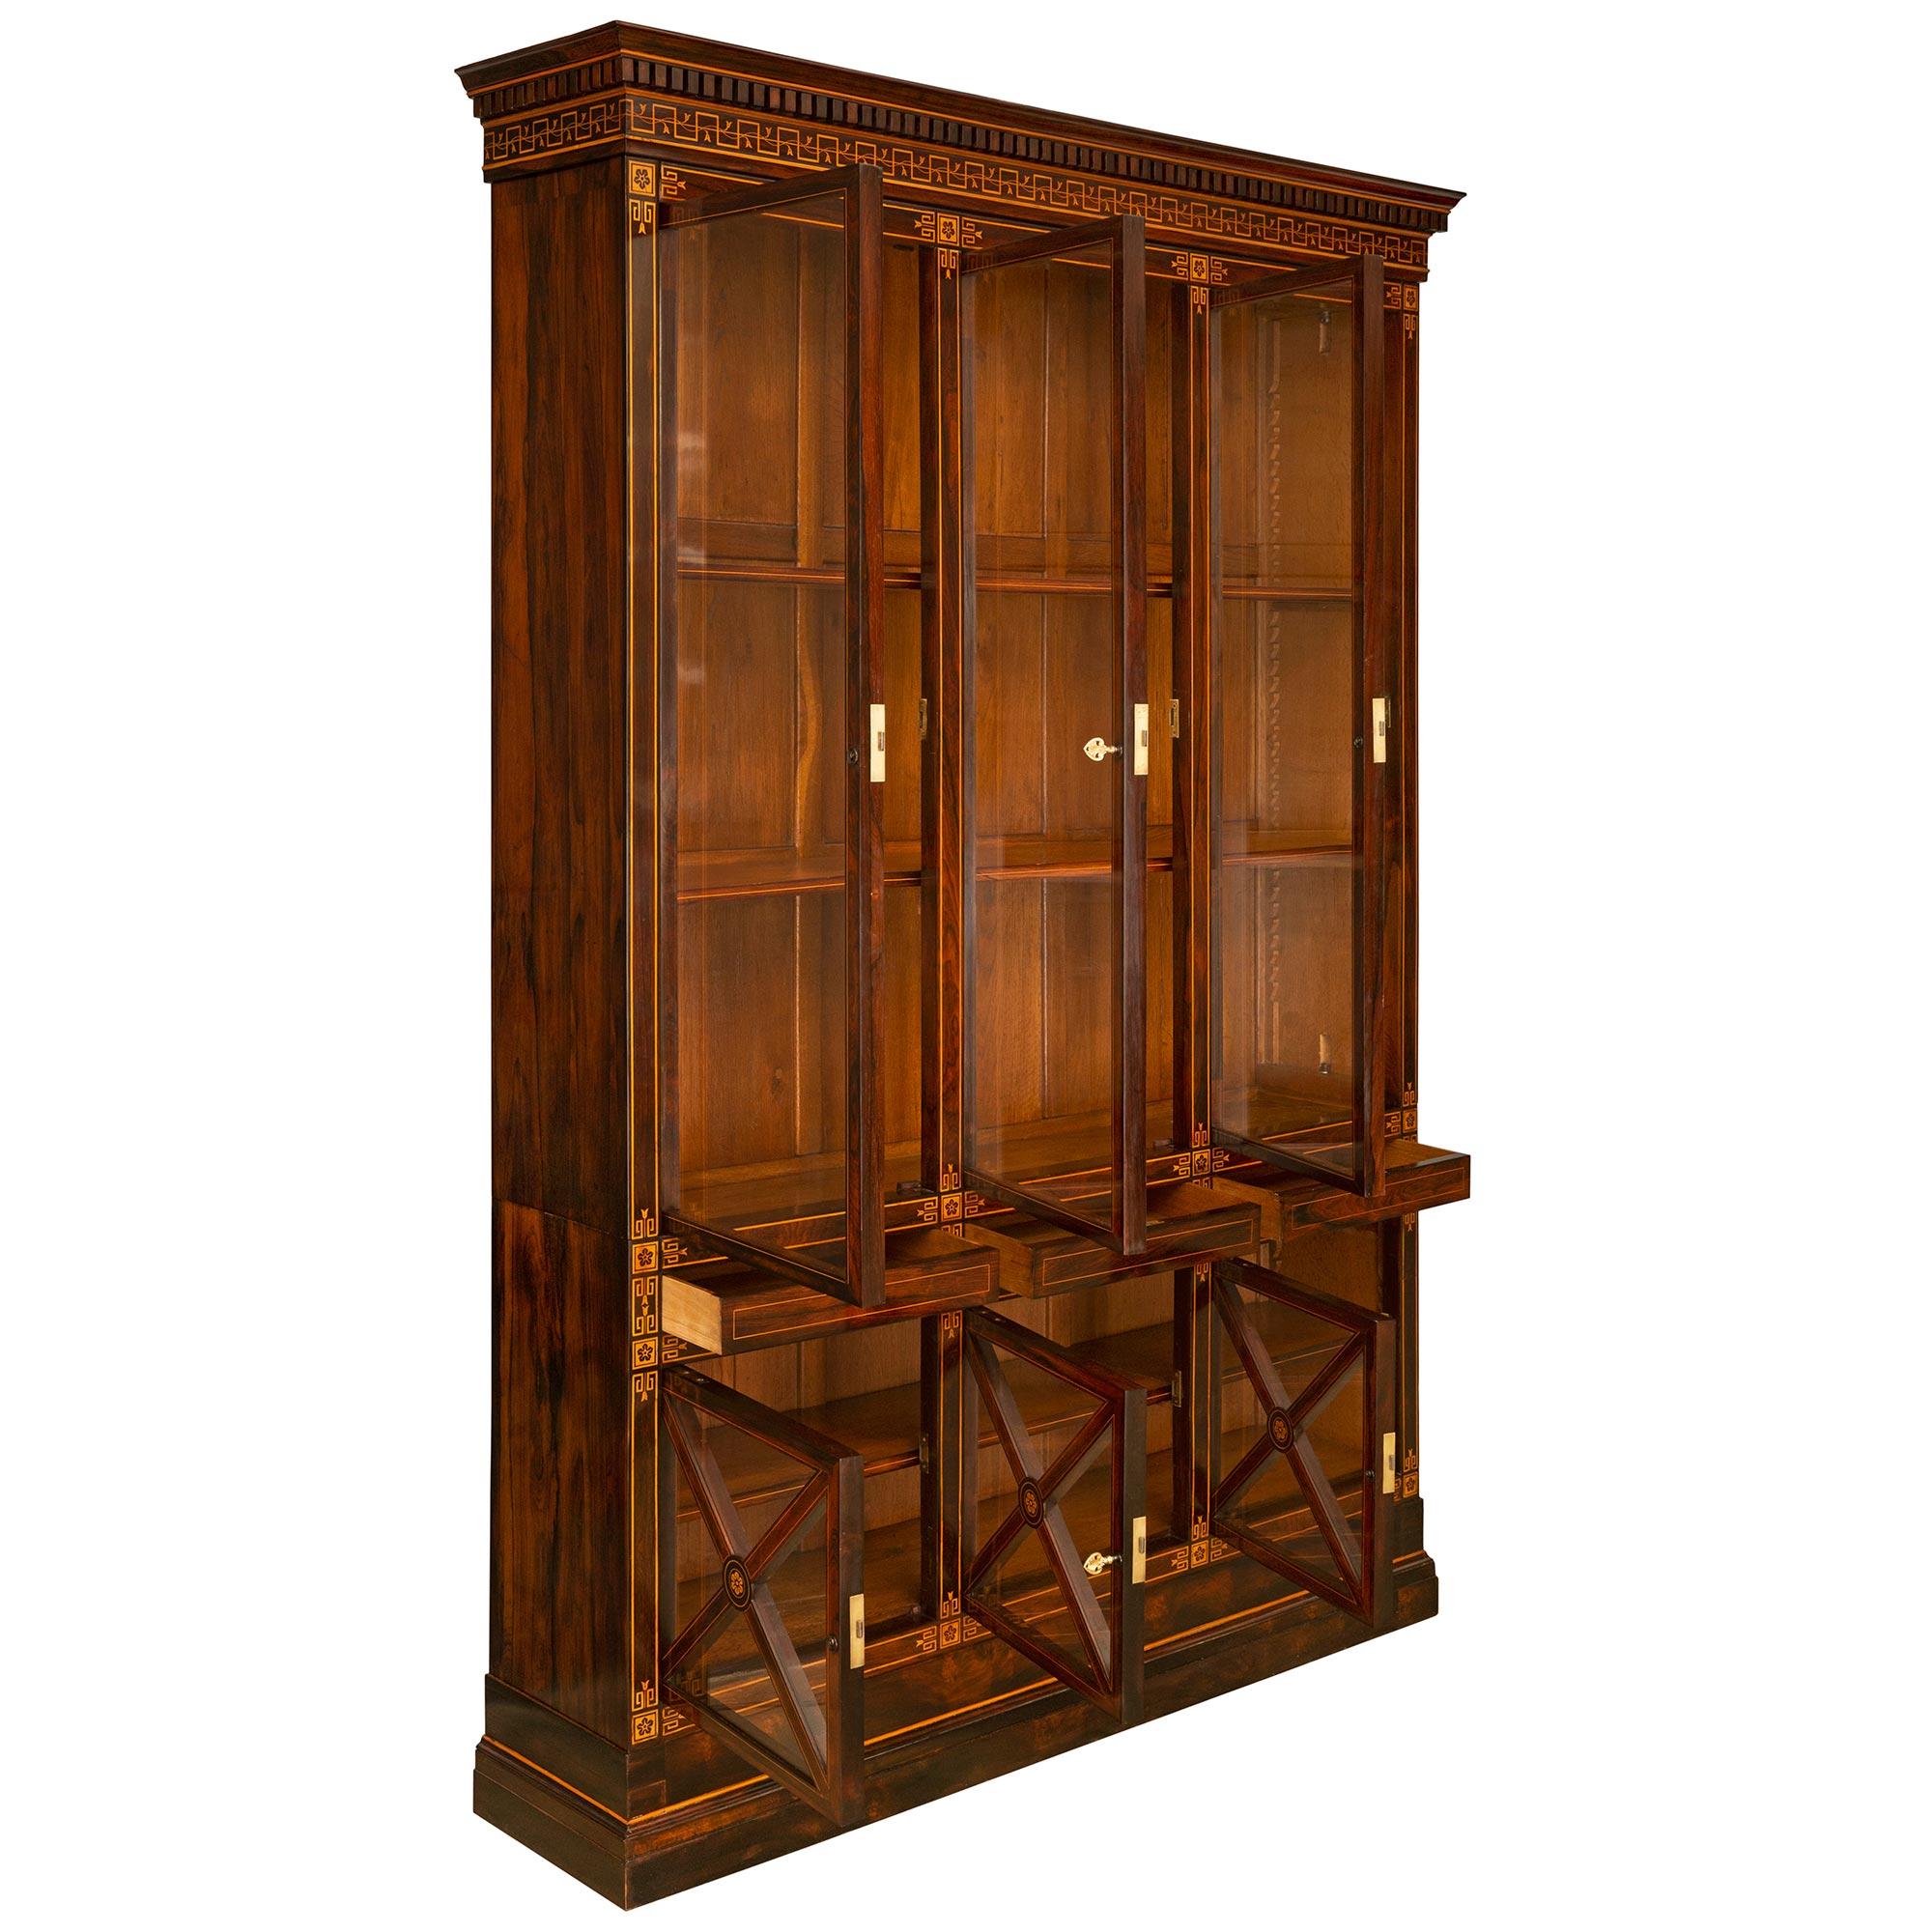 French 19th Century Charles X Period Rosewood And Maple Bookcase/Vitrine In Good Condition For Sale In West Palm Beach, FL